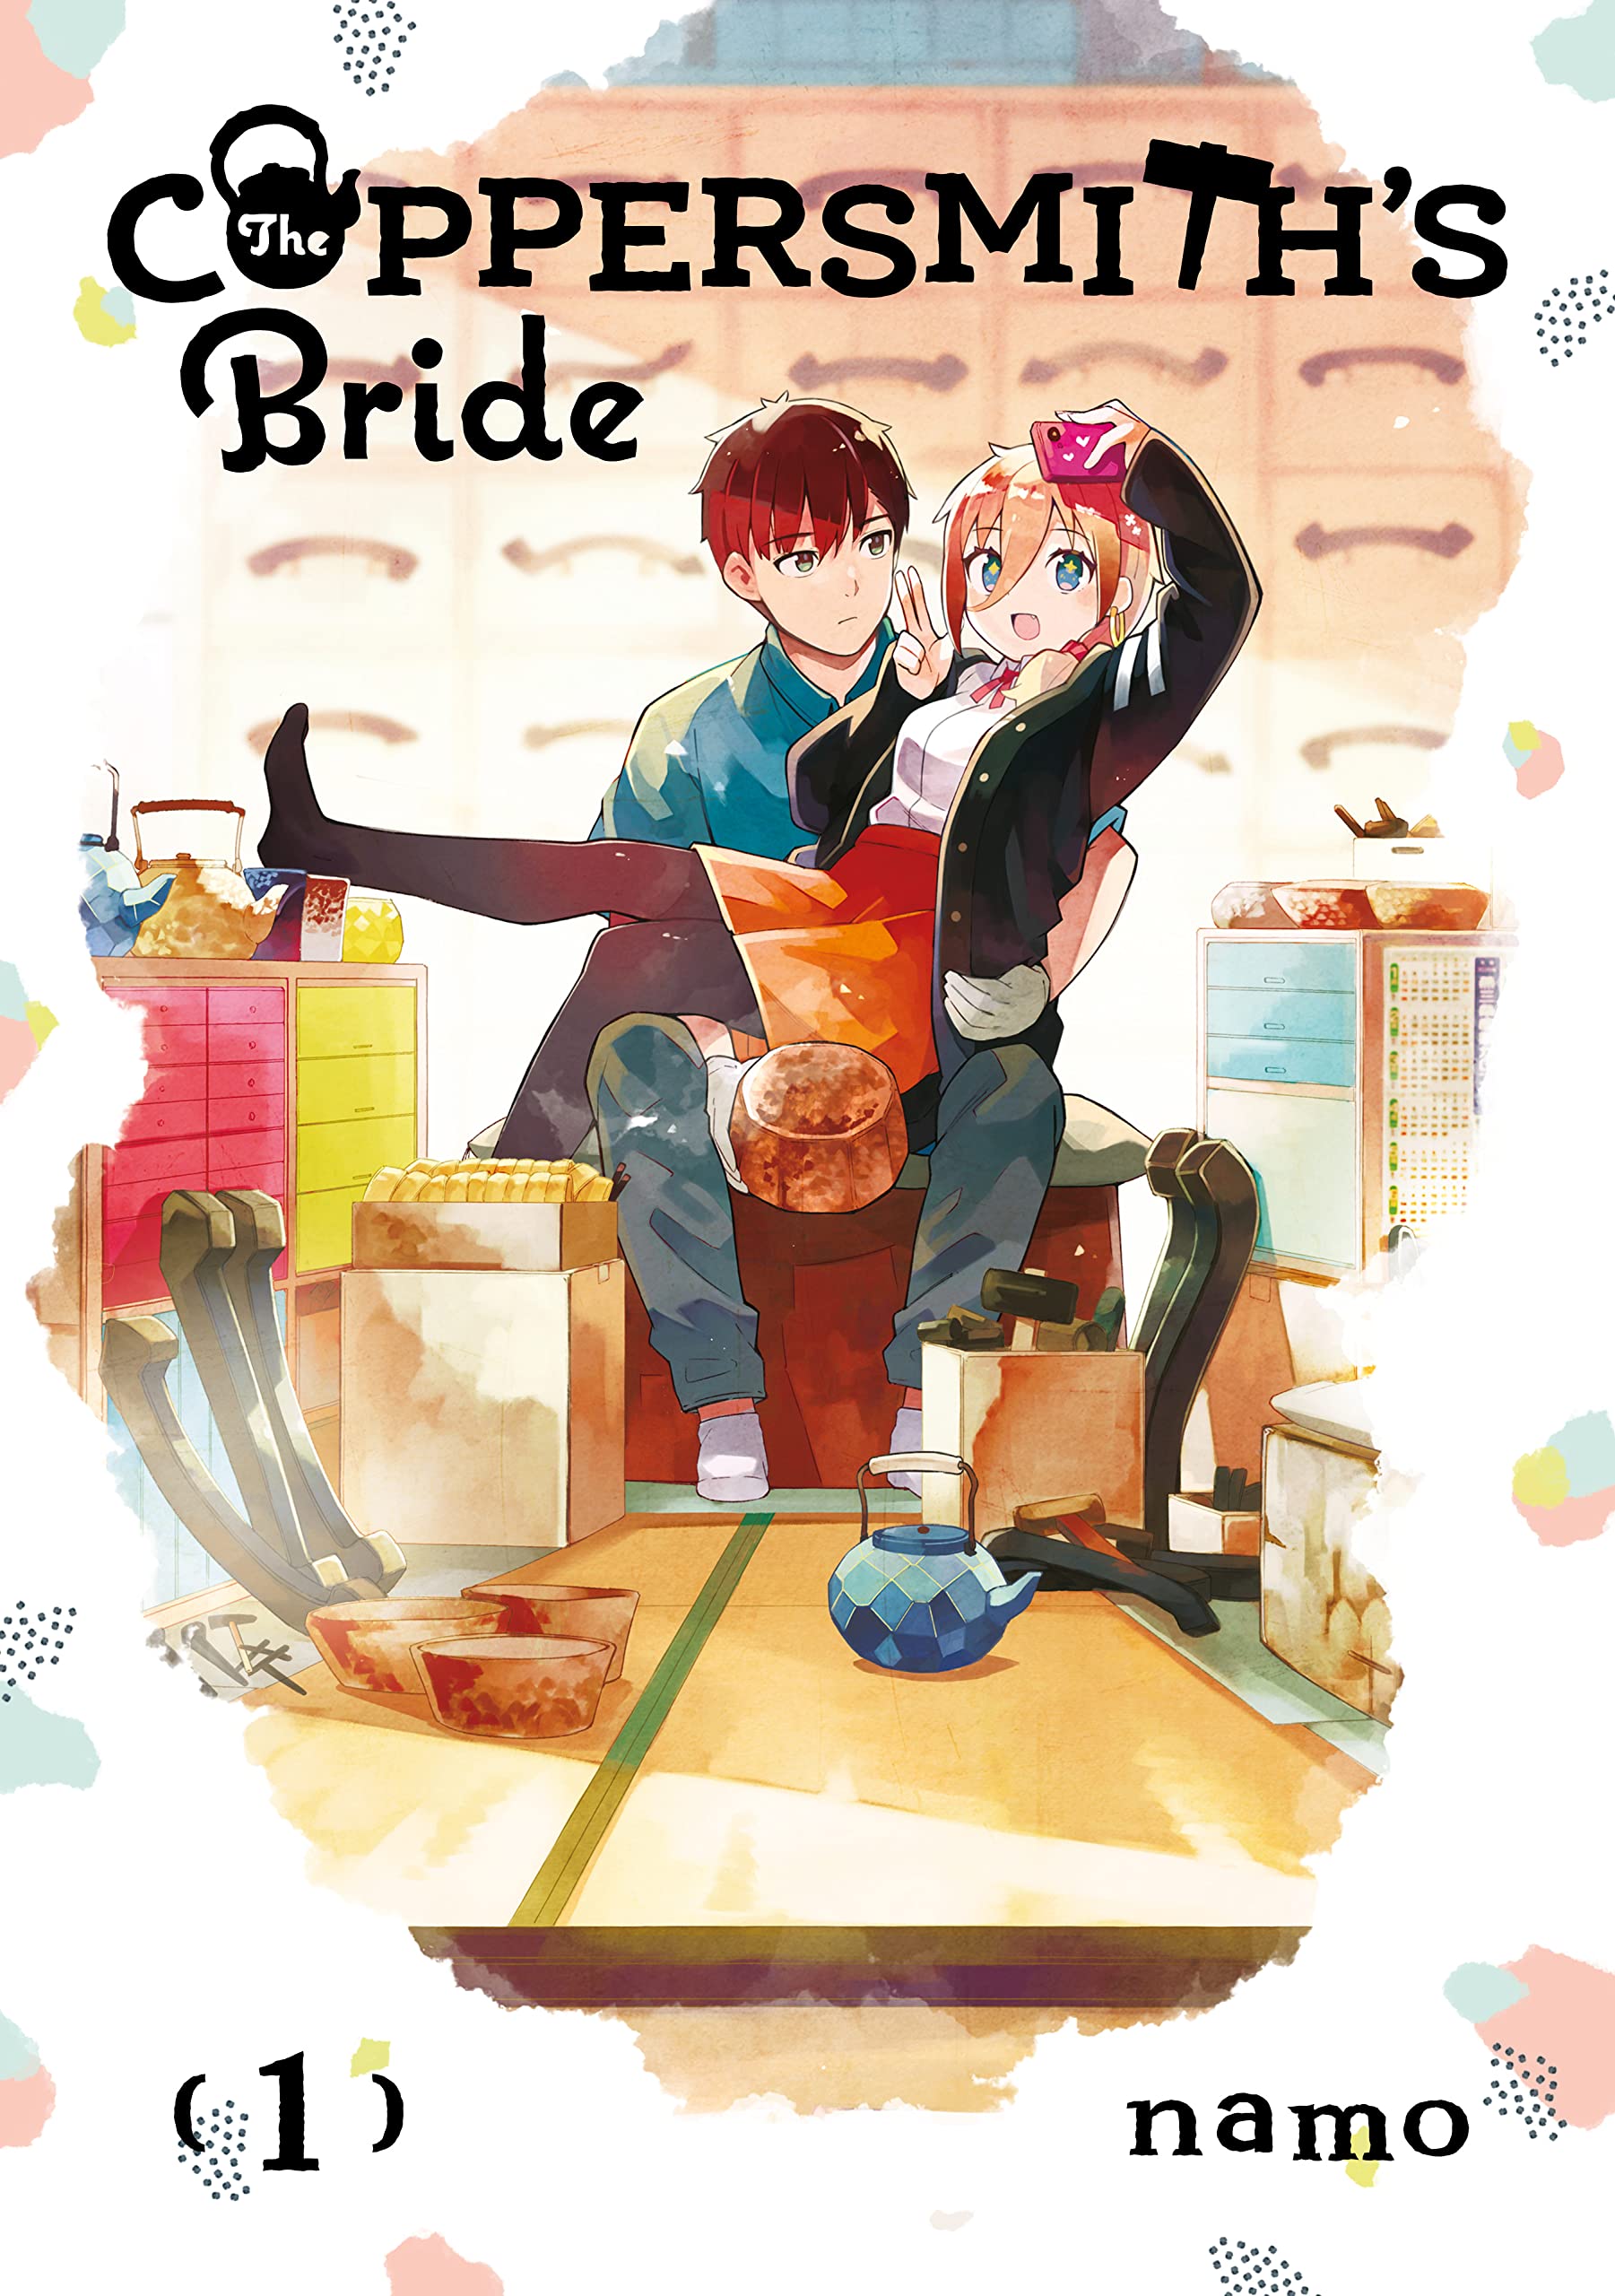 The Coppersmith's Bride Volume 1 Review